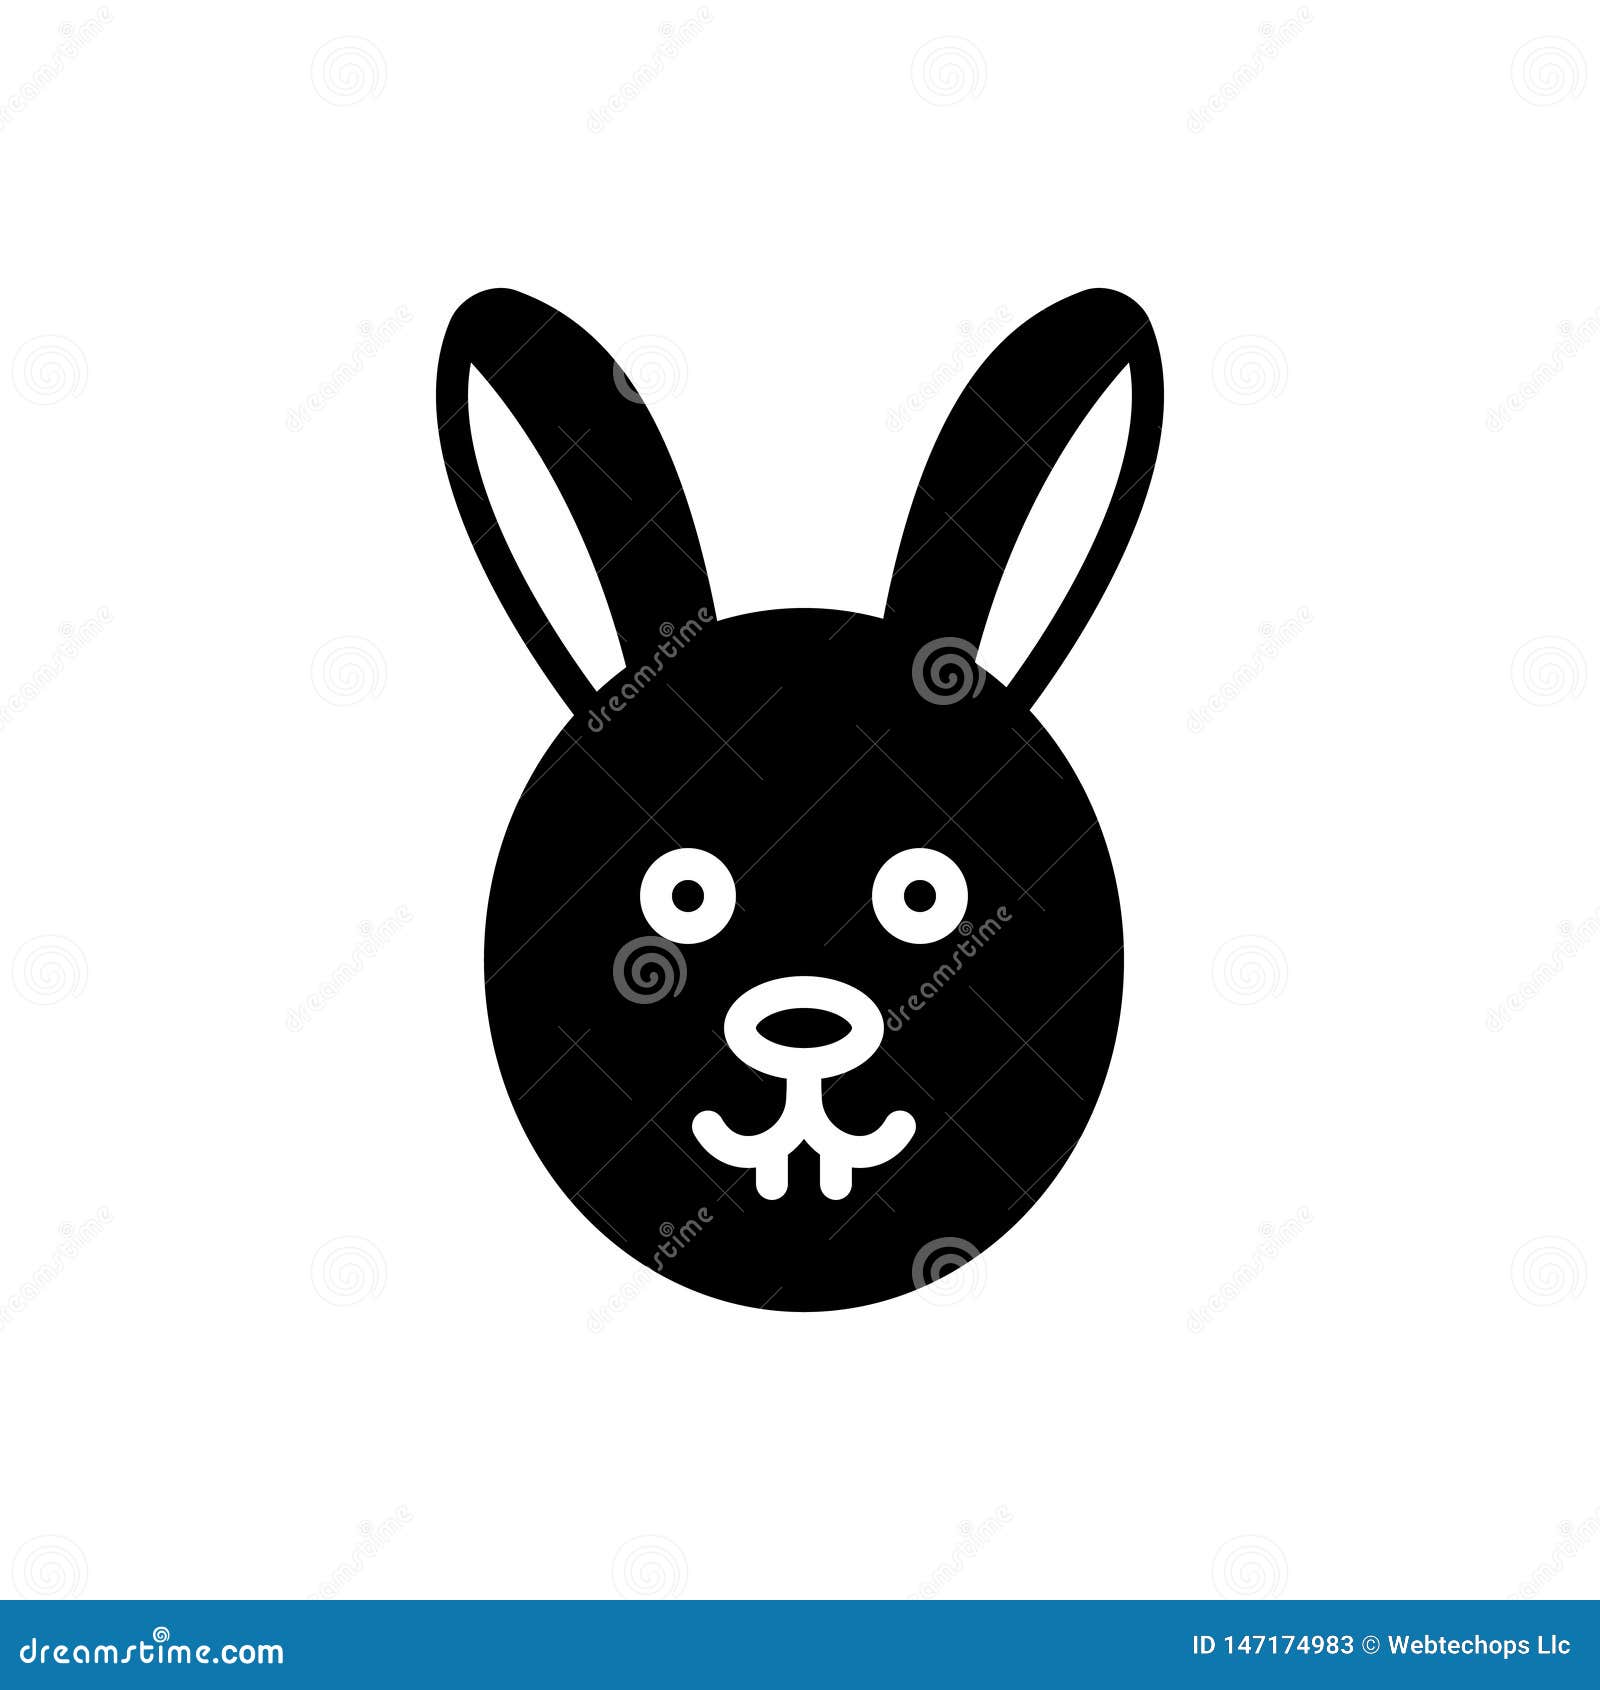 black solid icon for rabbit, conejo and animal